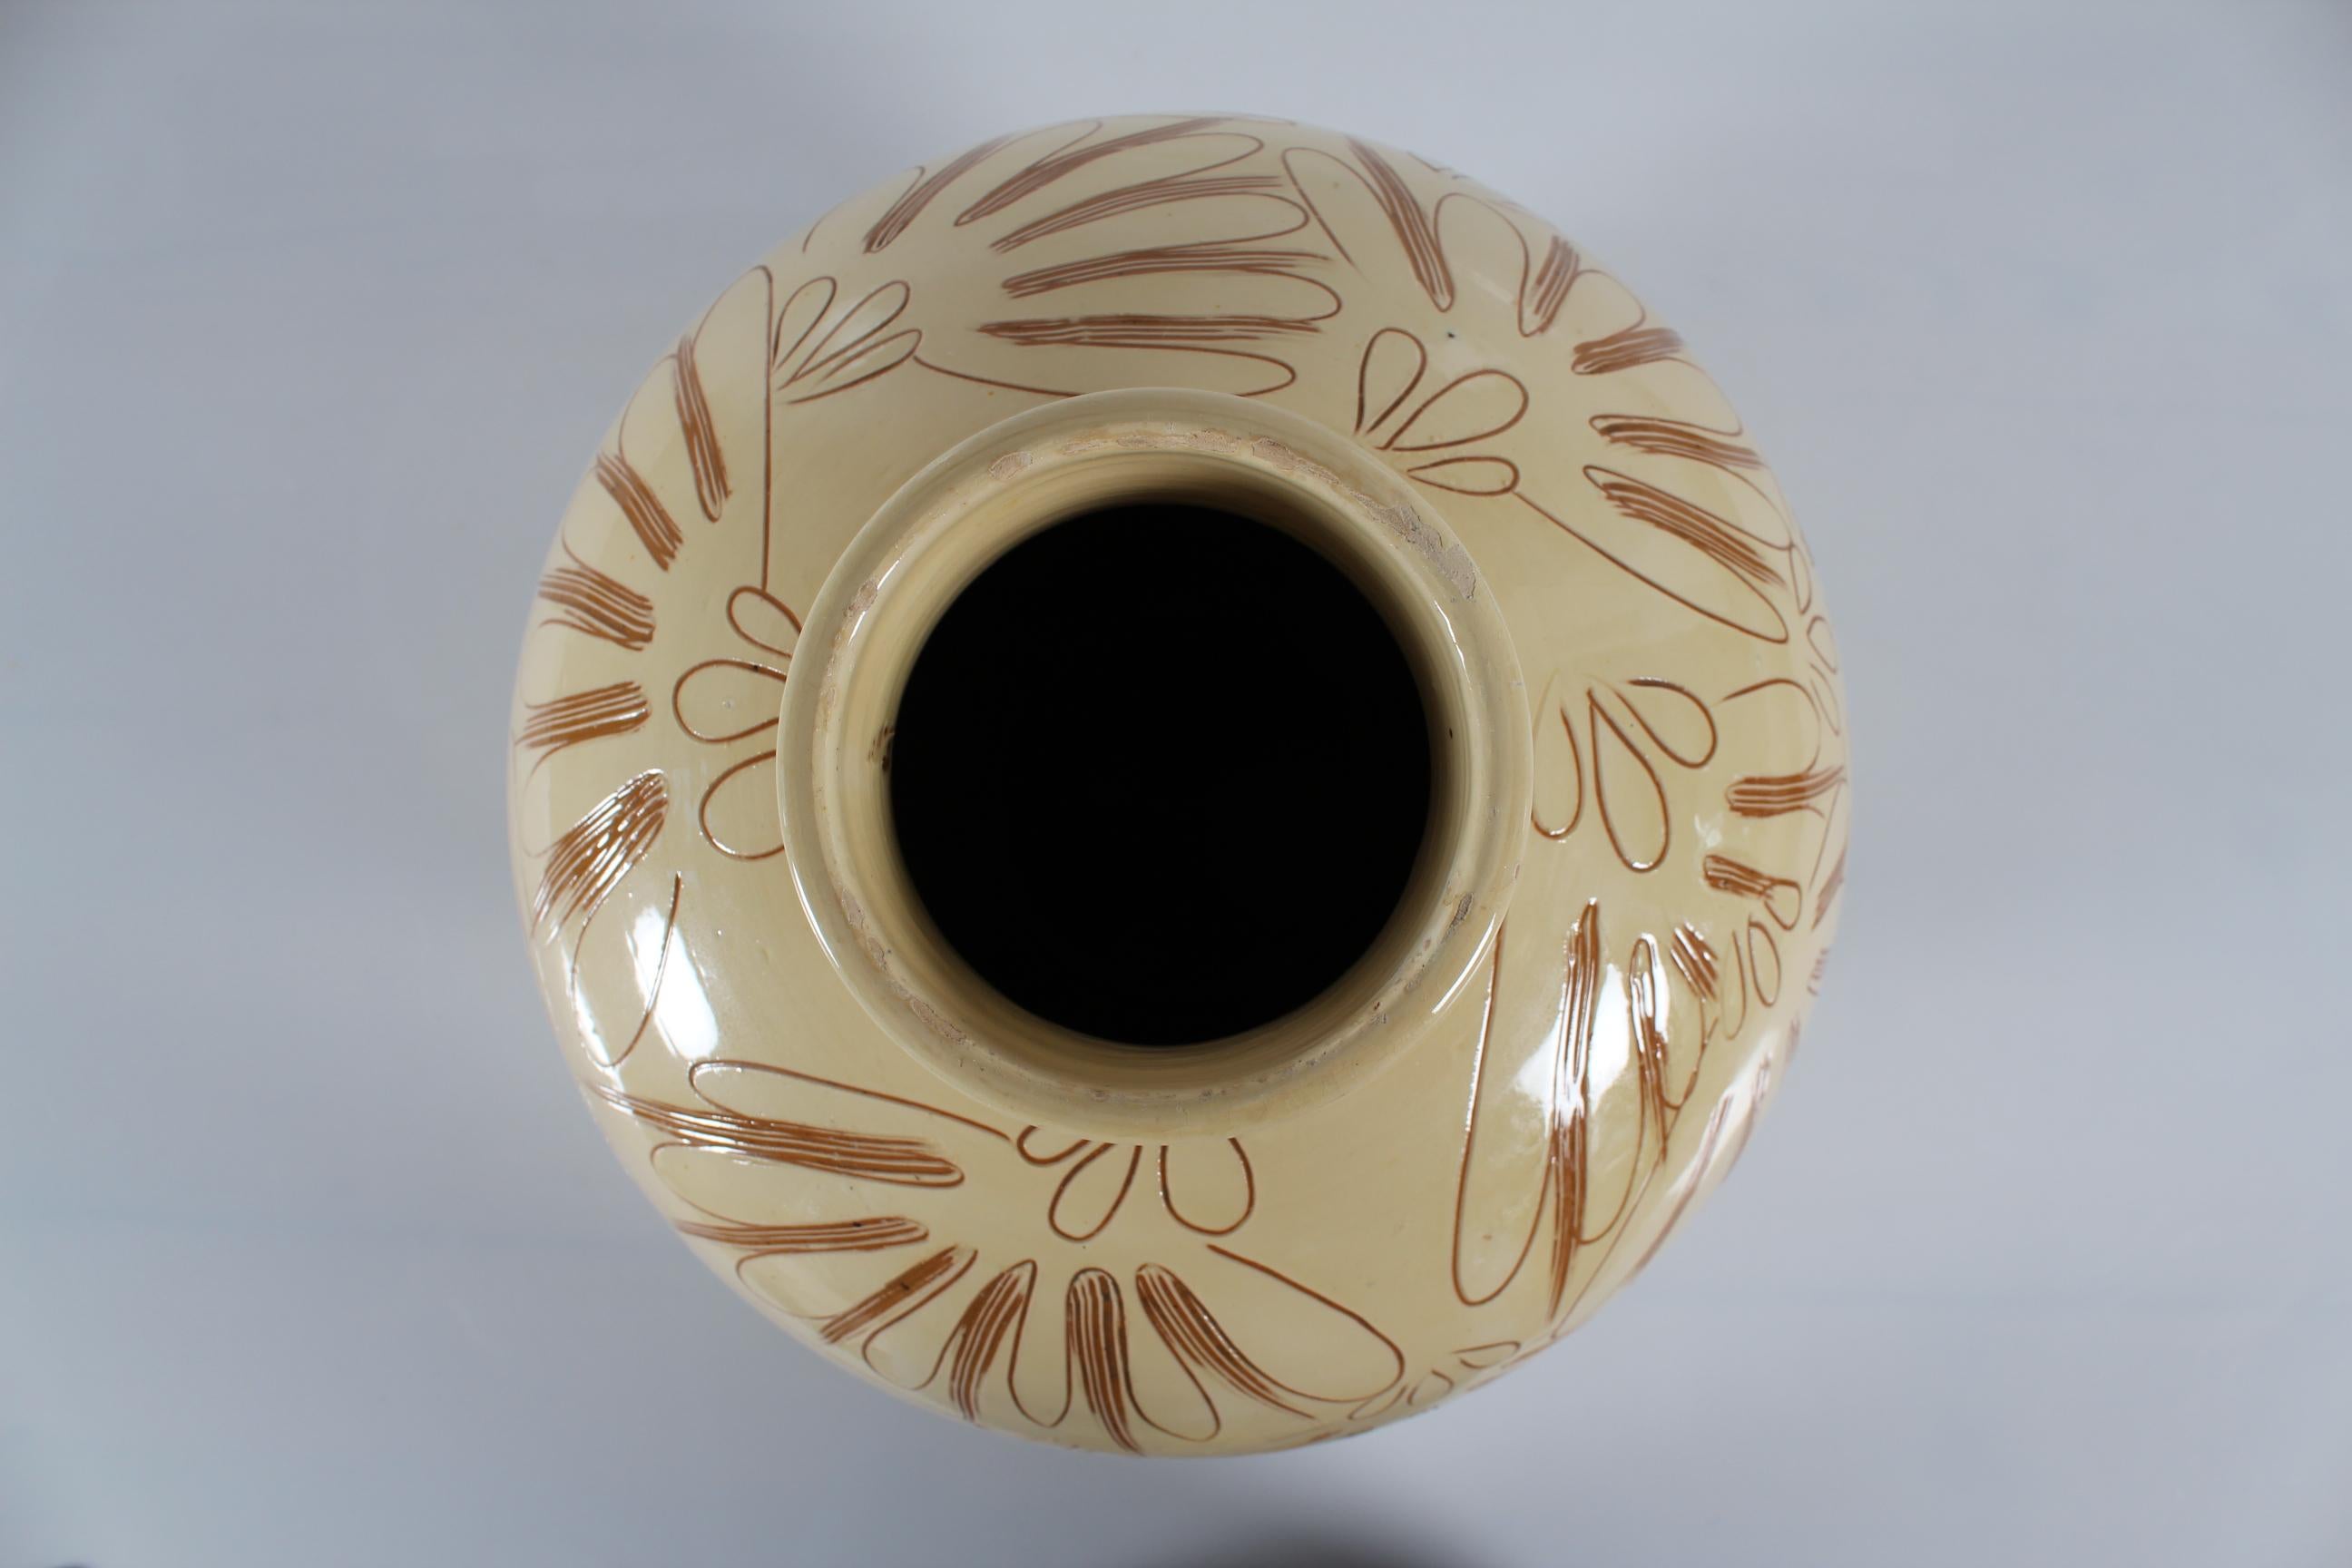 Large Herman A Kähler Sgraffito Floor Vase with Cream Yellow Glaze 1940-50s For Sale 1